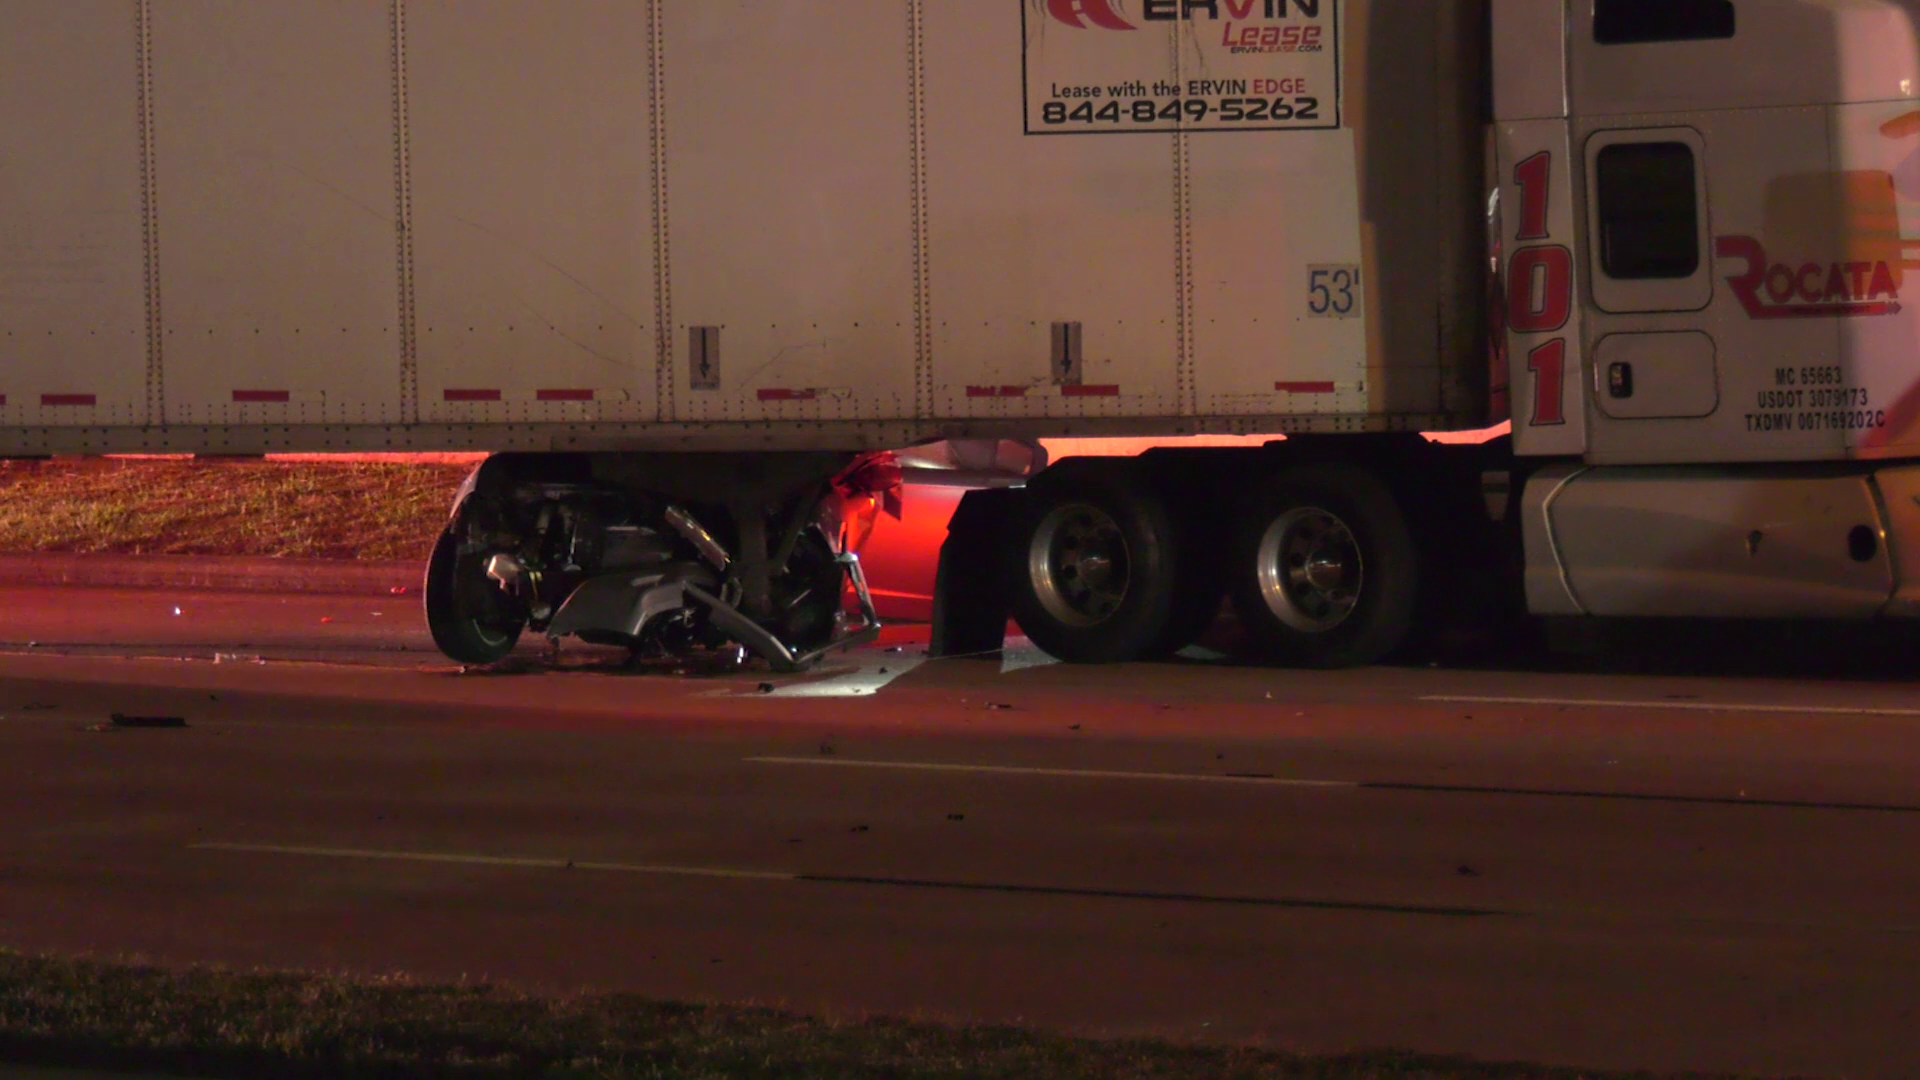 One person was transported to the hospital by Life Flight Wednesday night after a crash involving an 18-wheeler on the Katy Freeway feeder.